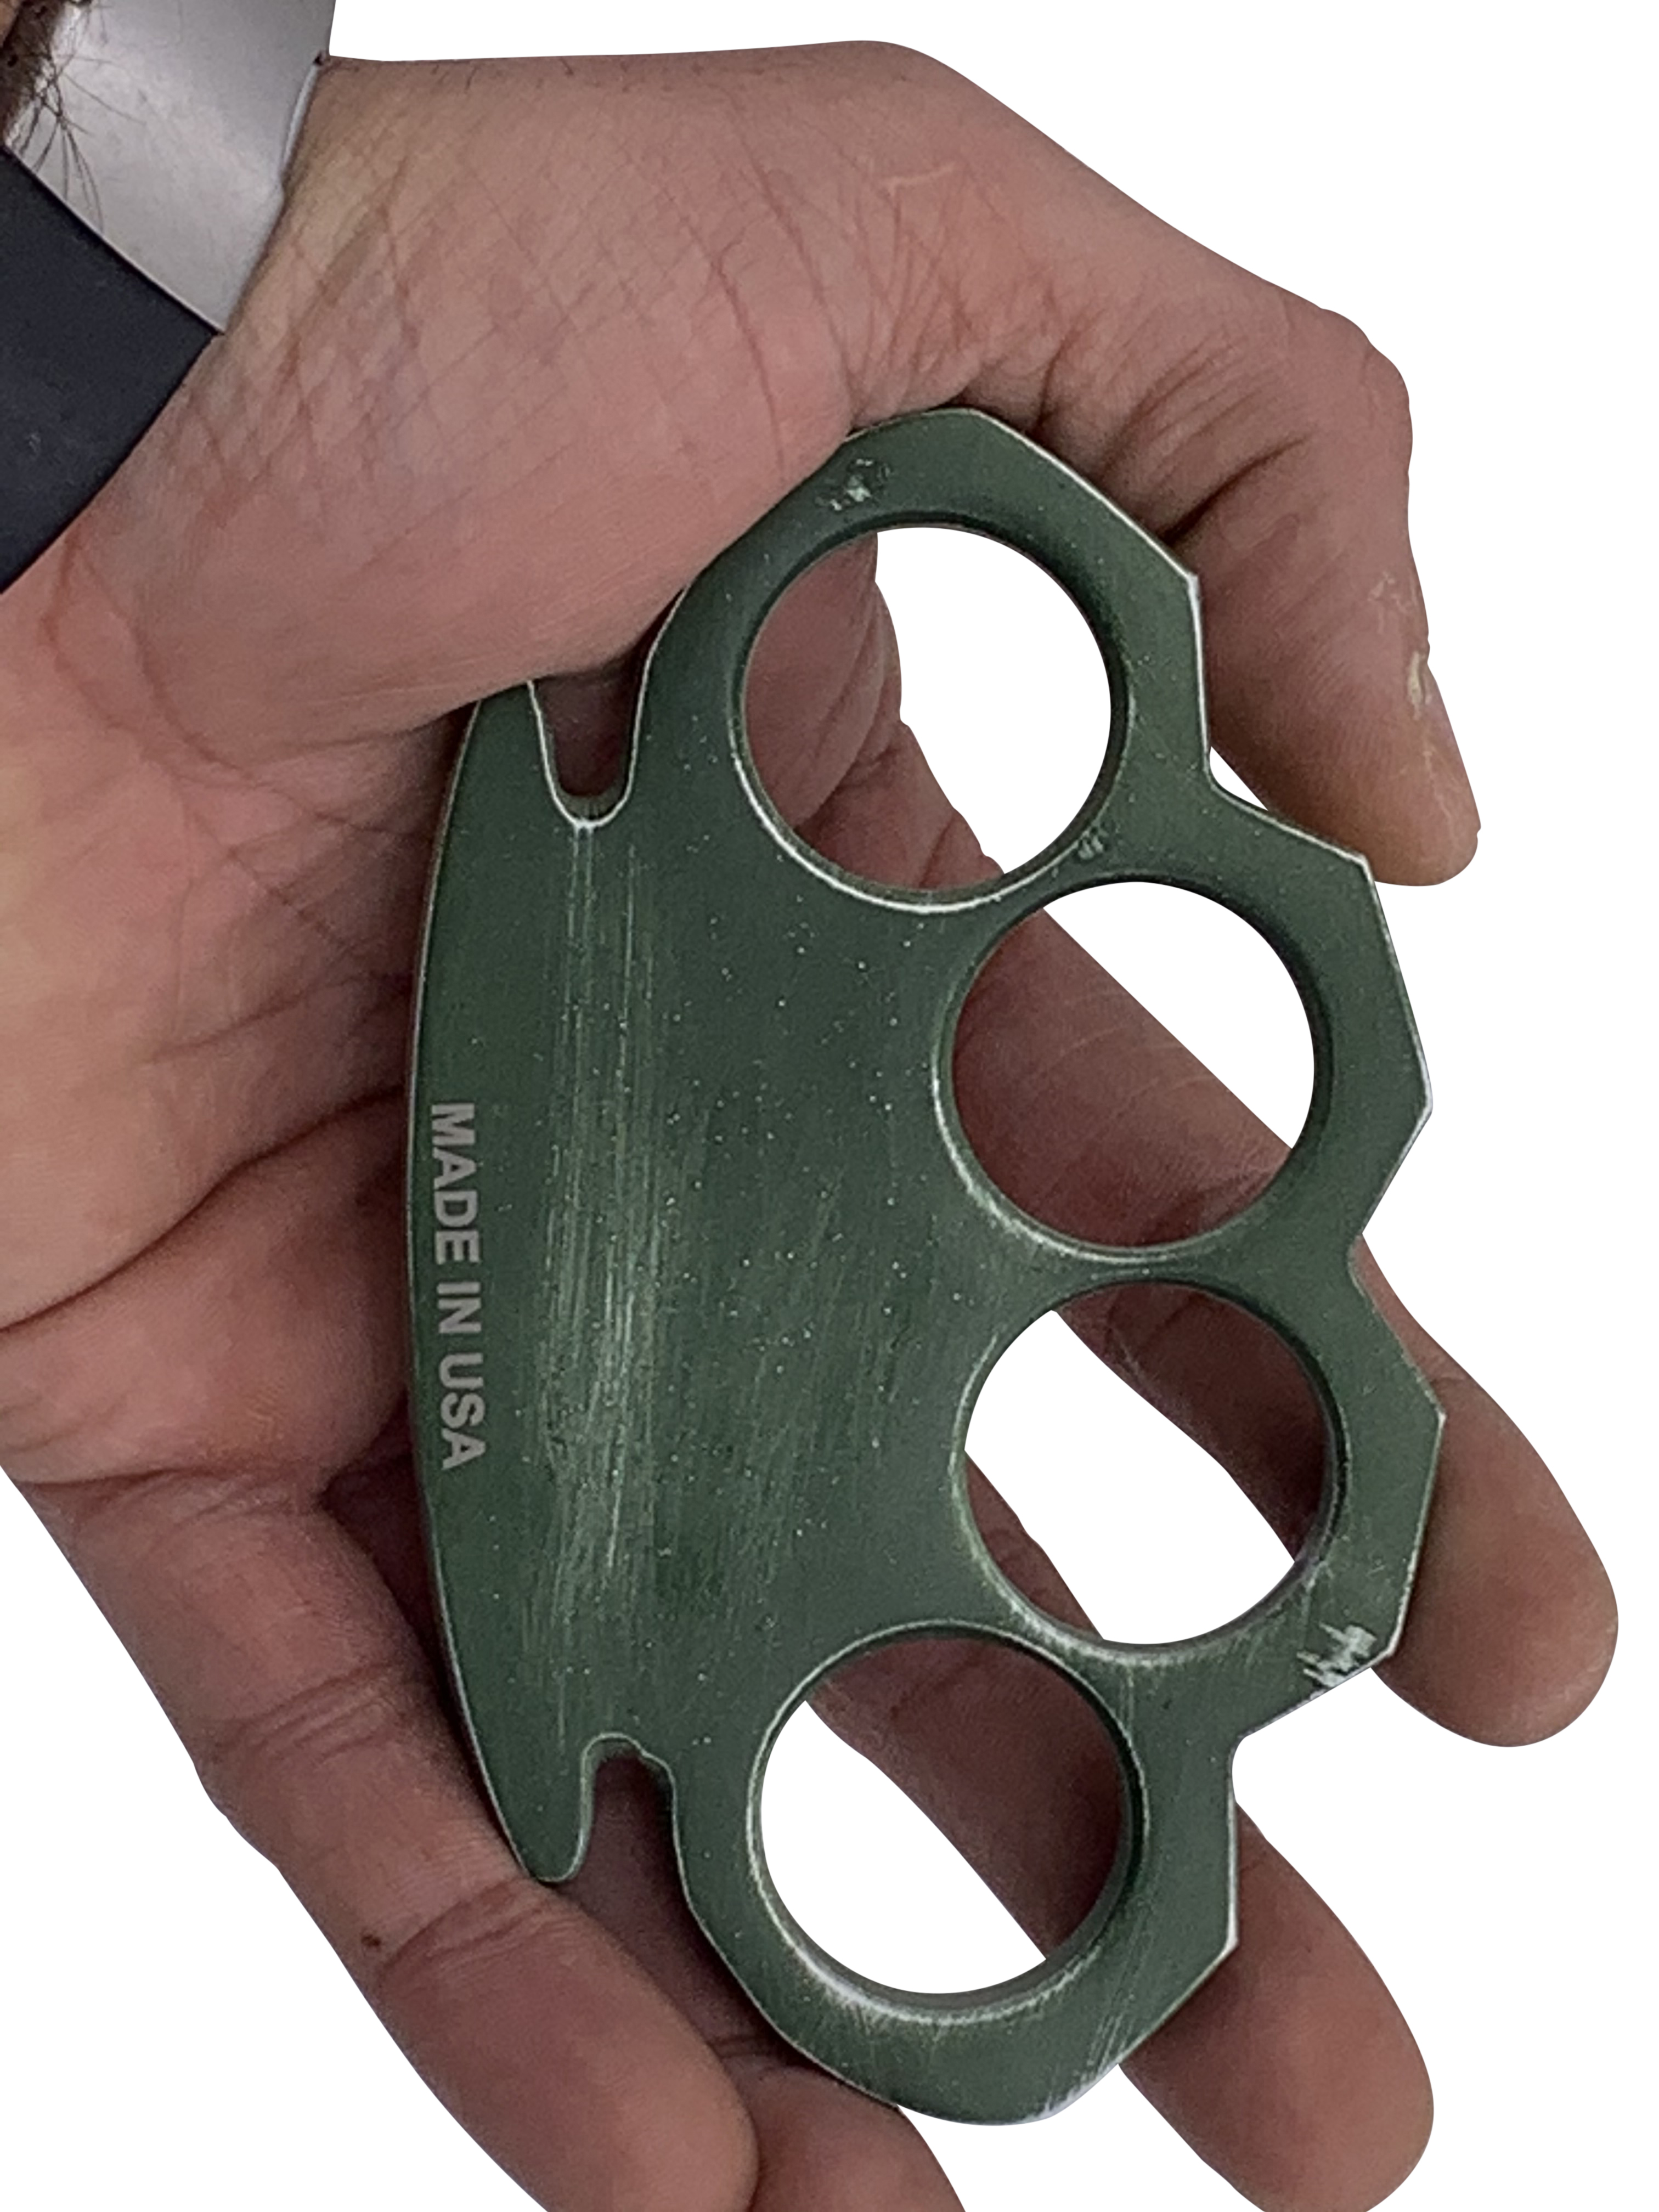 CI 300 P DGR 1Cerakote Made in USA Brass Knuckles Distressed Green